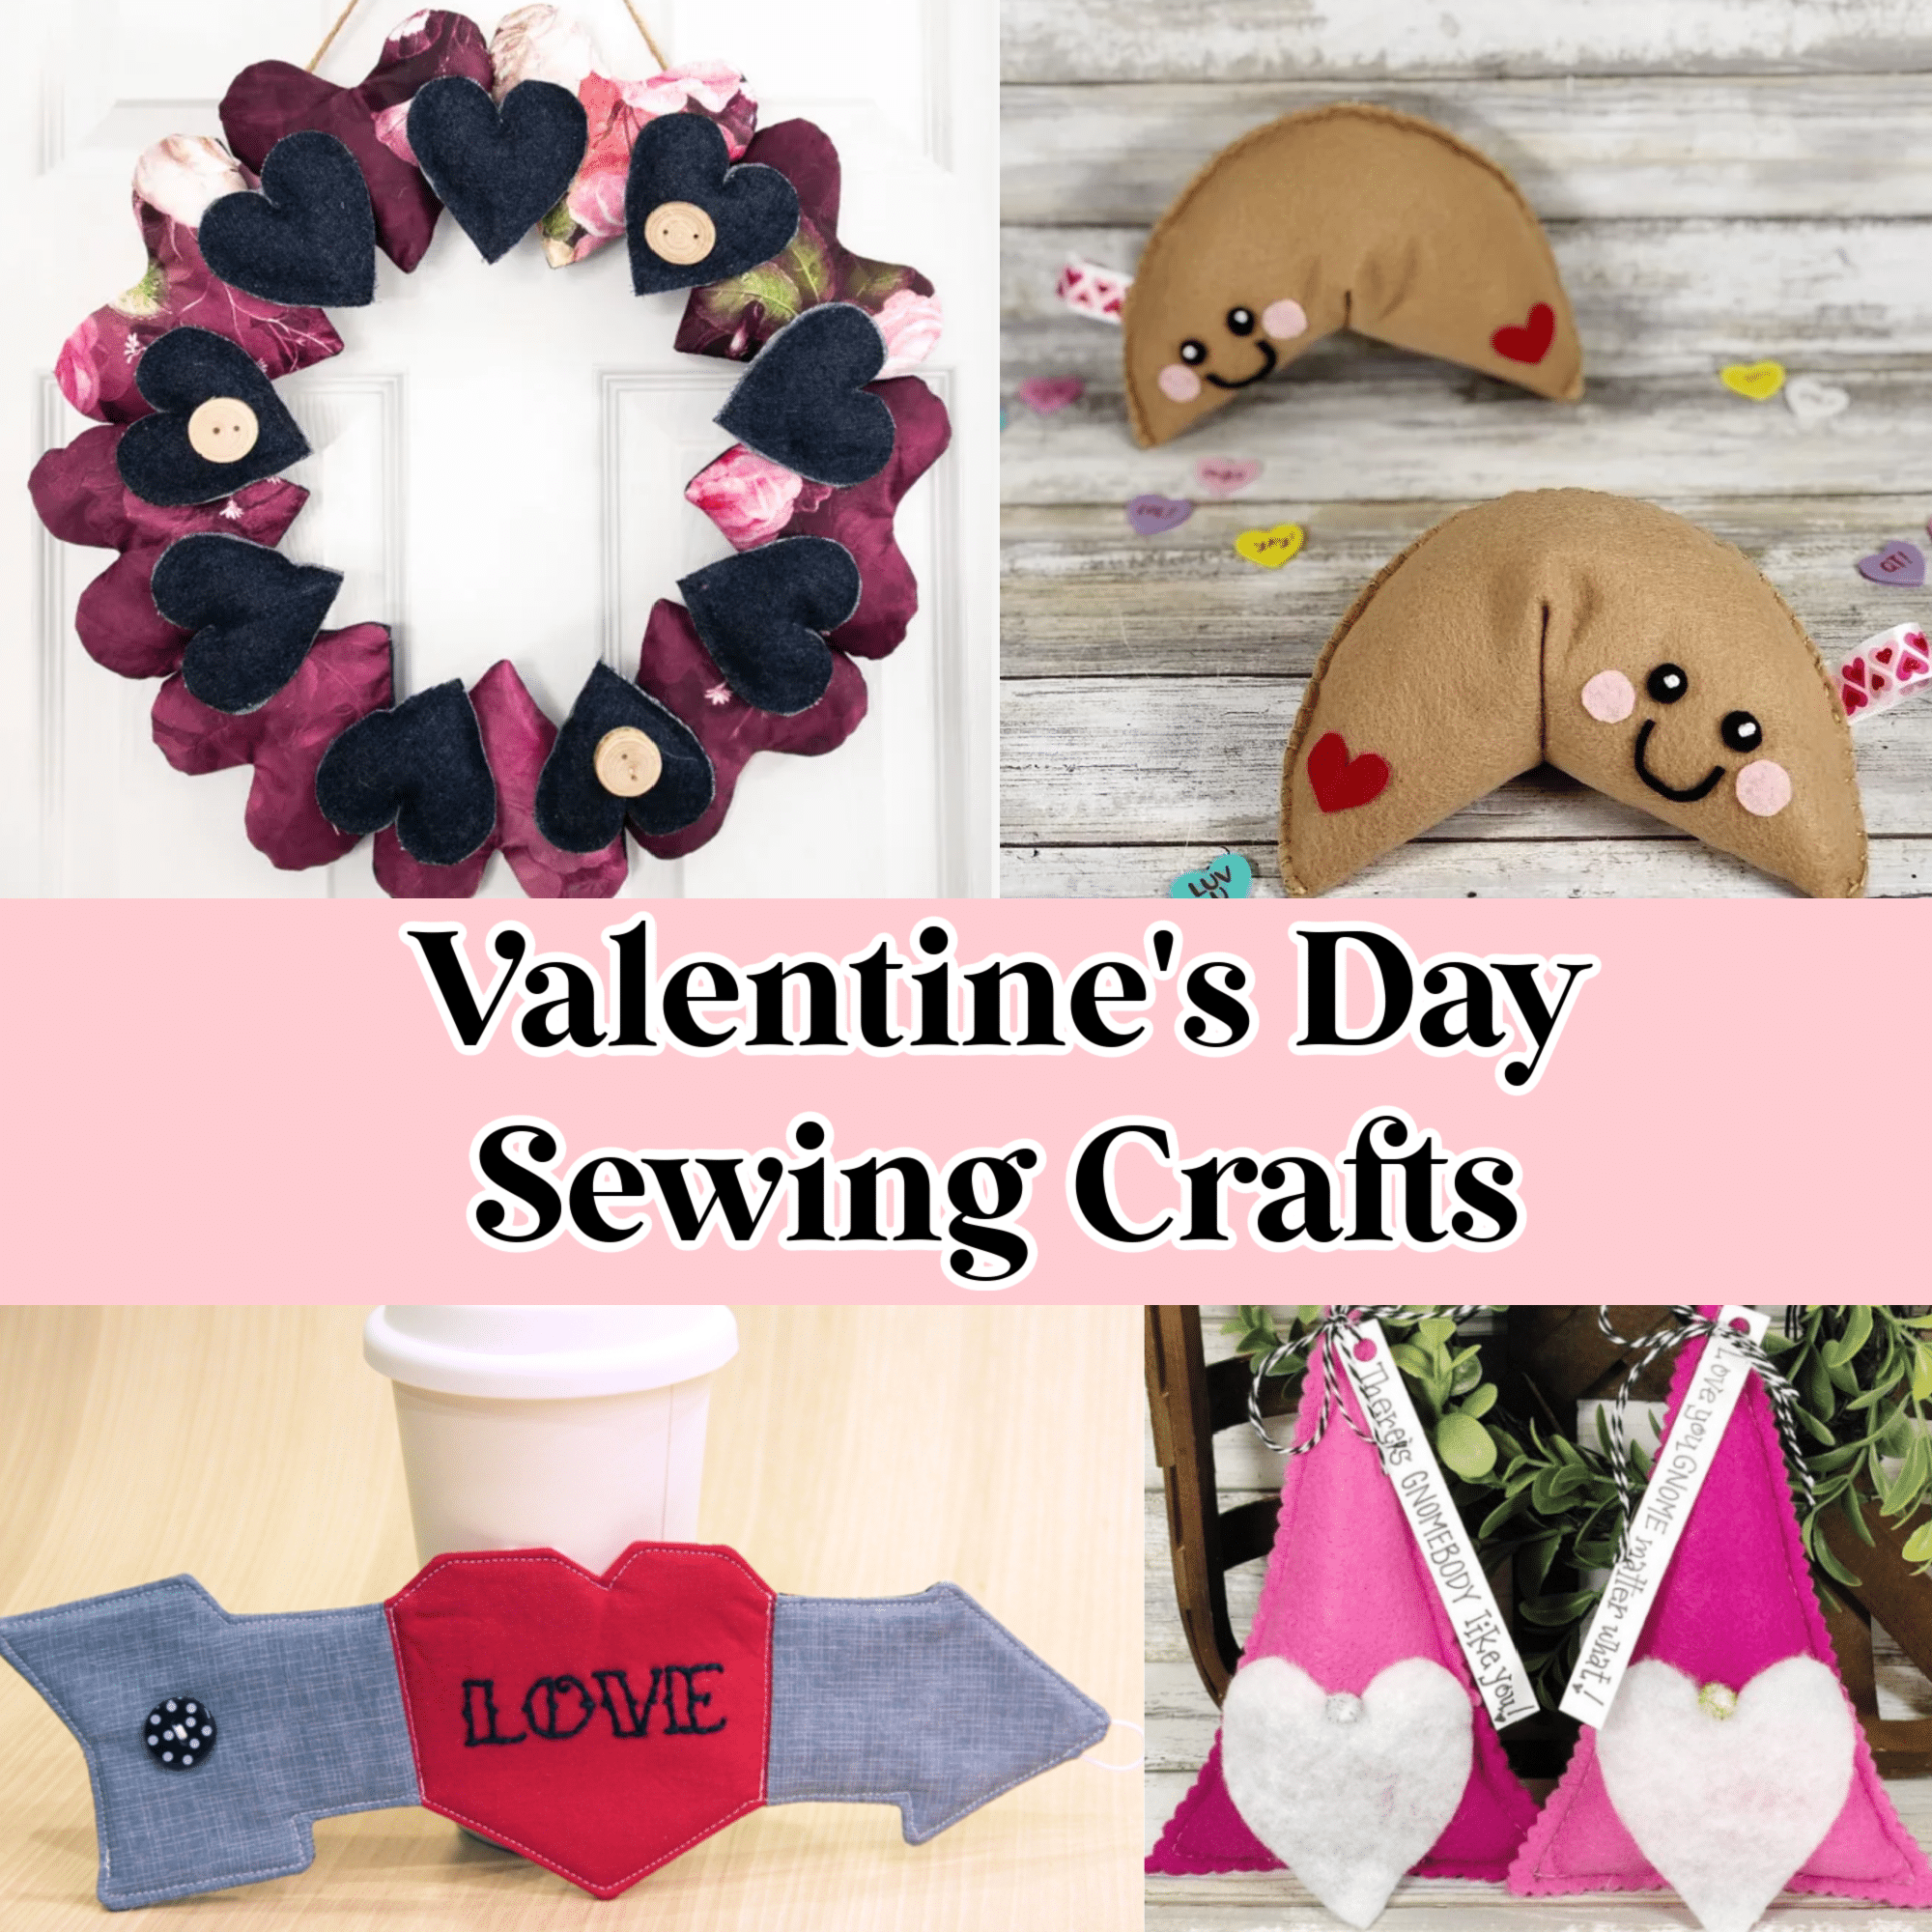 Valentine's day sewing projects.